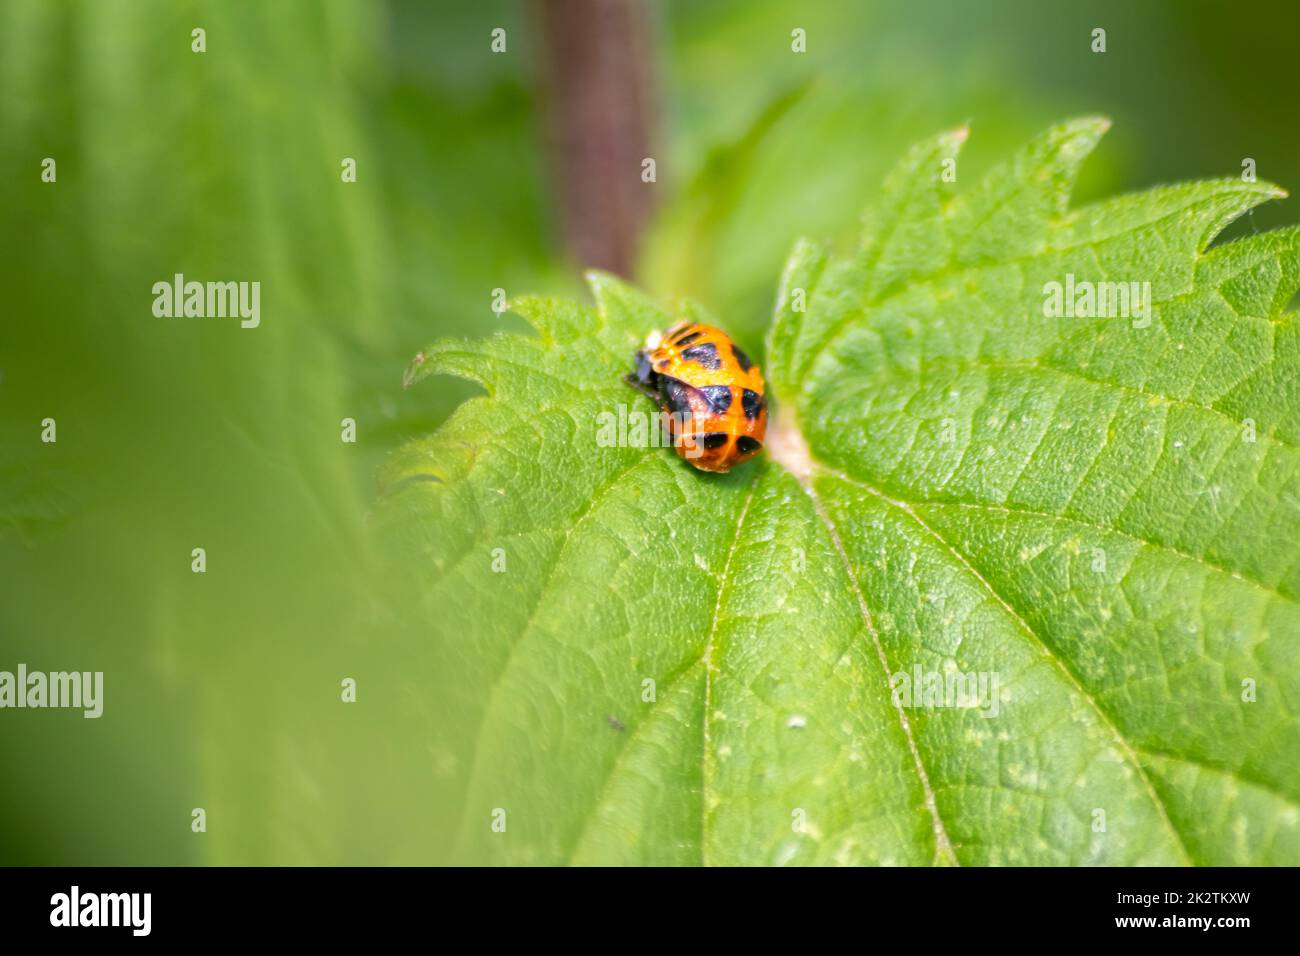 New born ladybug eclosing green leaf switches from larva to ladybug beetle with black dots red wings show new born lucky talisman harmony natural pest control in agriculture Stock Photo